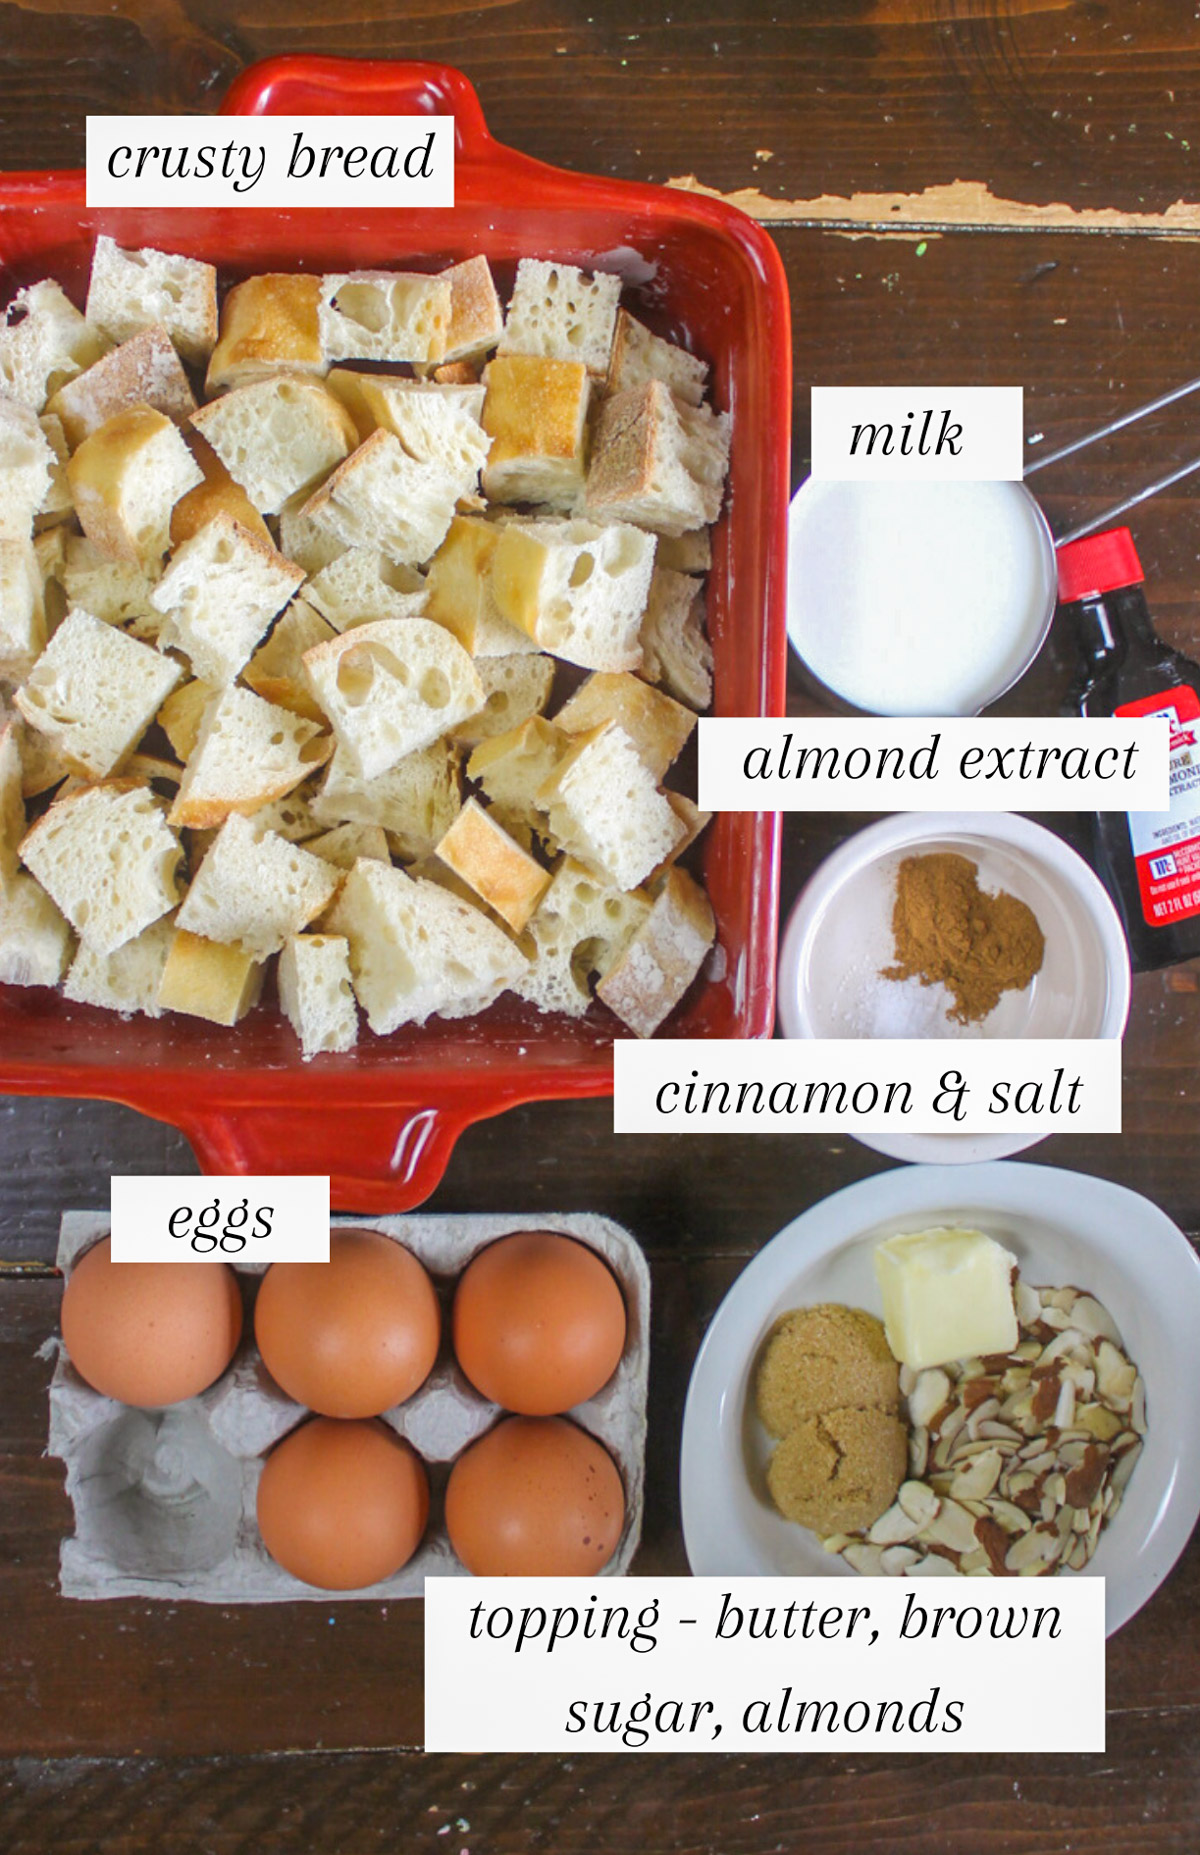 Labeled ingredients for French Toast Bake.